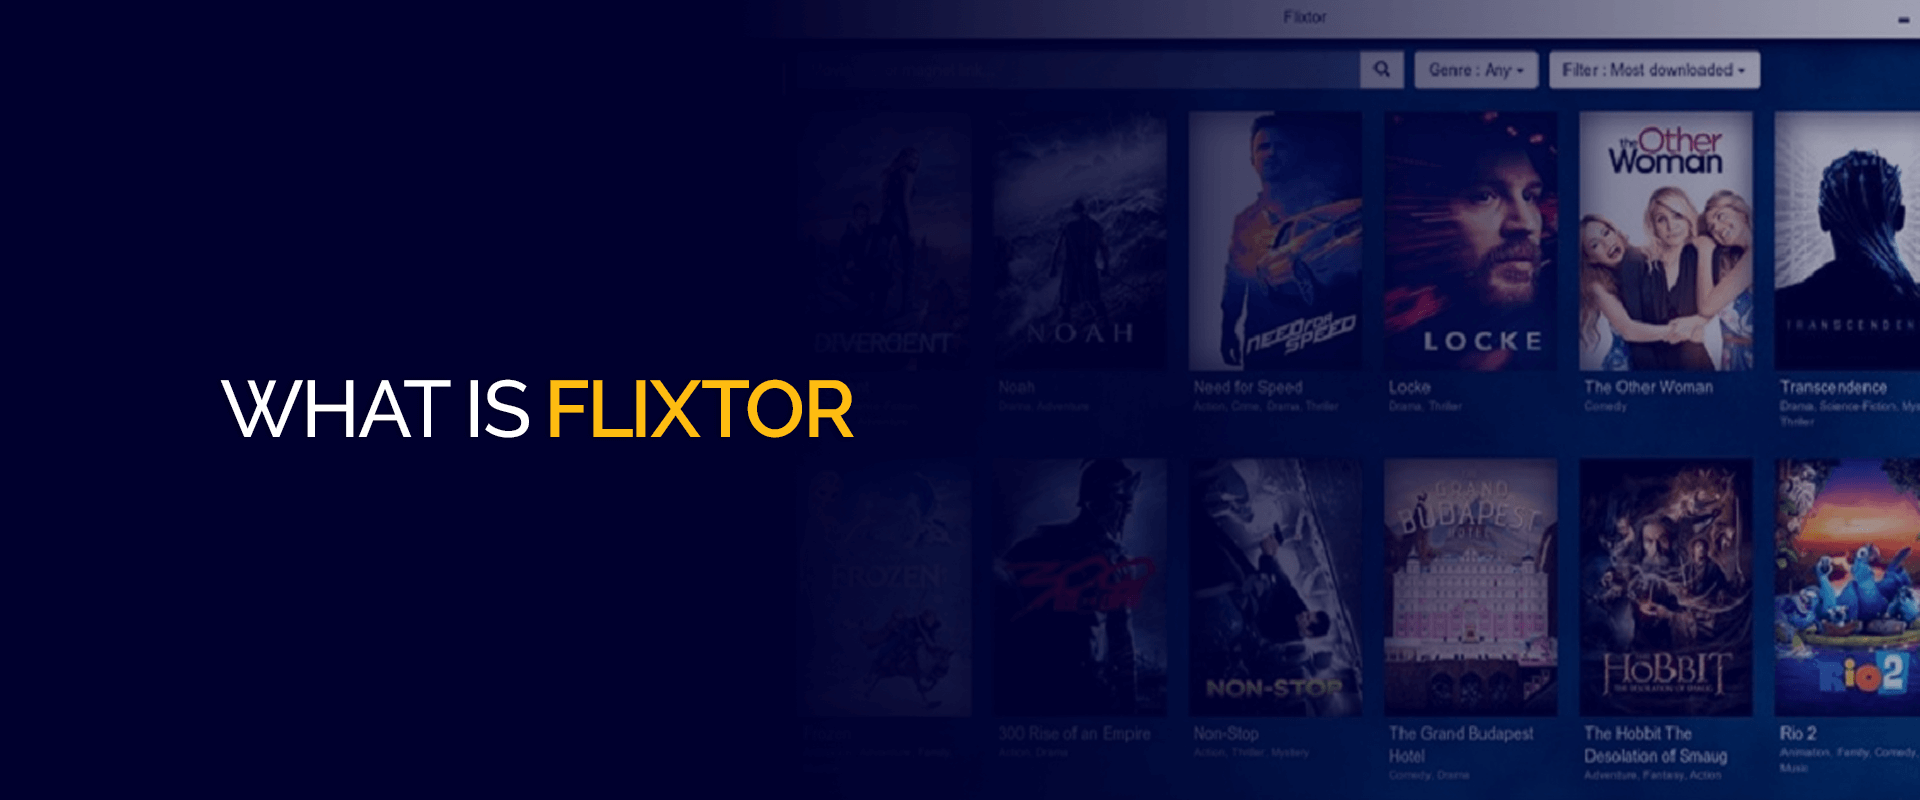 Flixtor: Revolutionizing the Streaming Experience